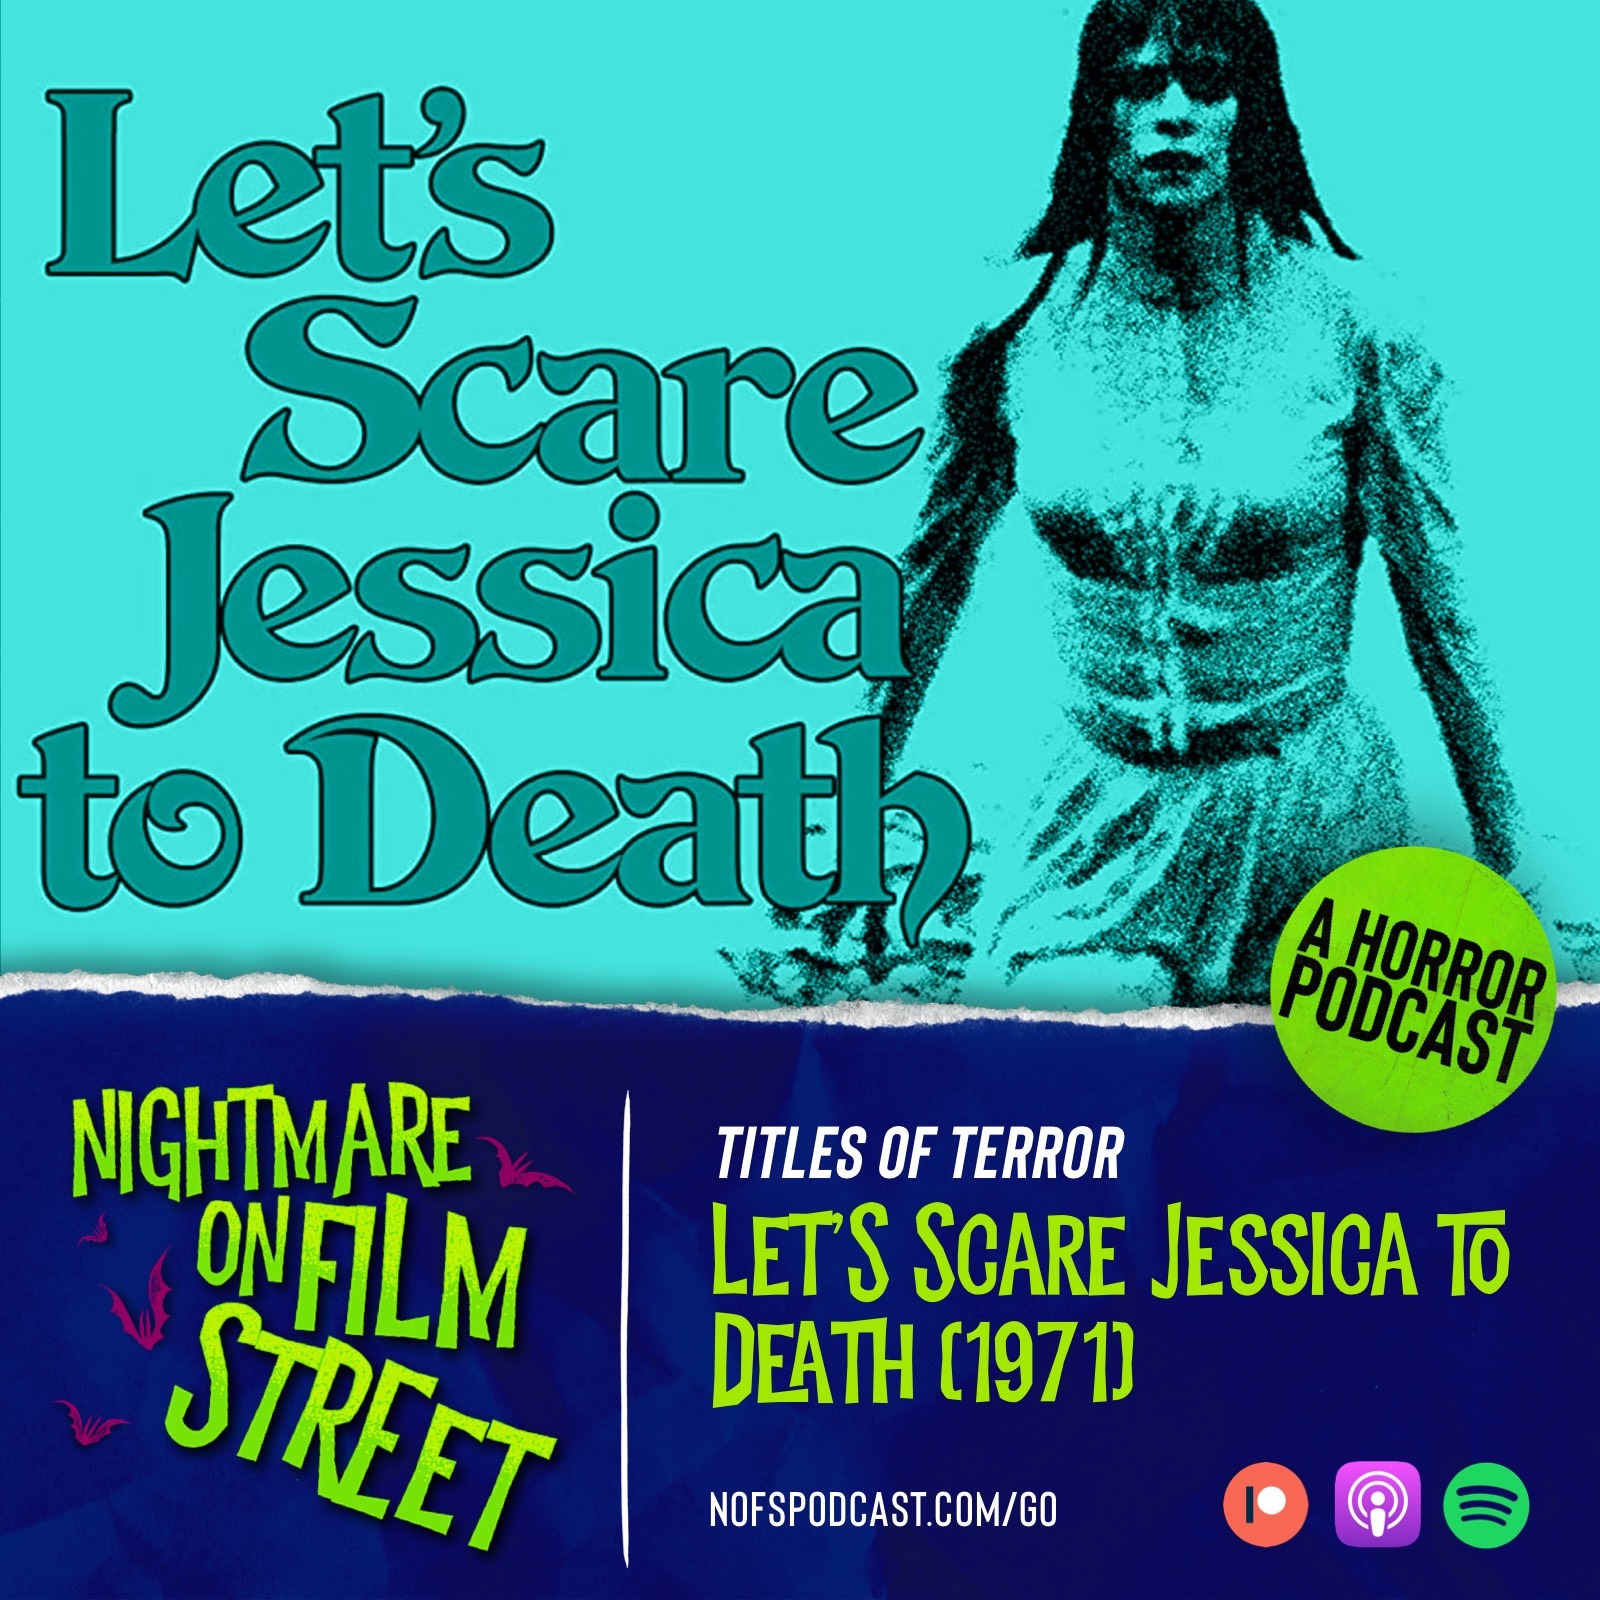 Titles of Terror: Let's Scare Jessica To Death (1971)